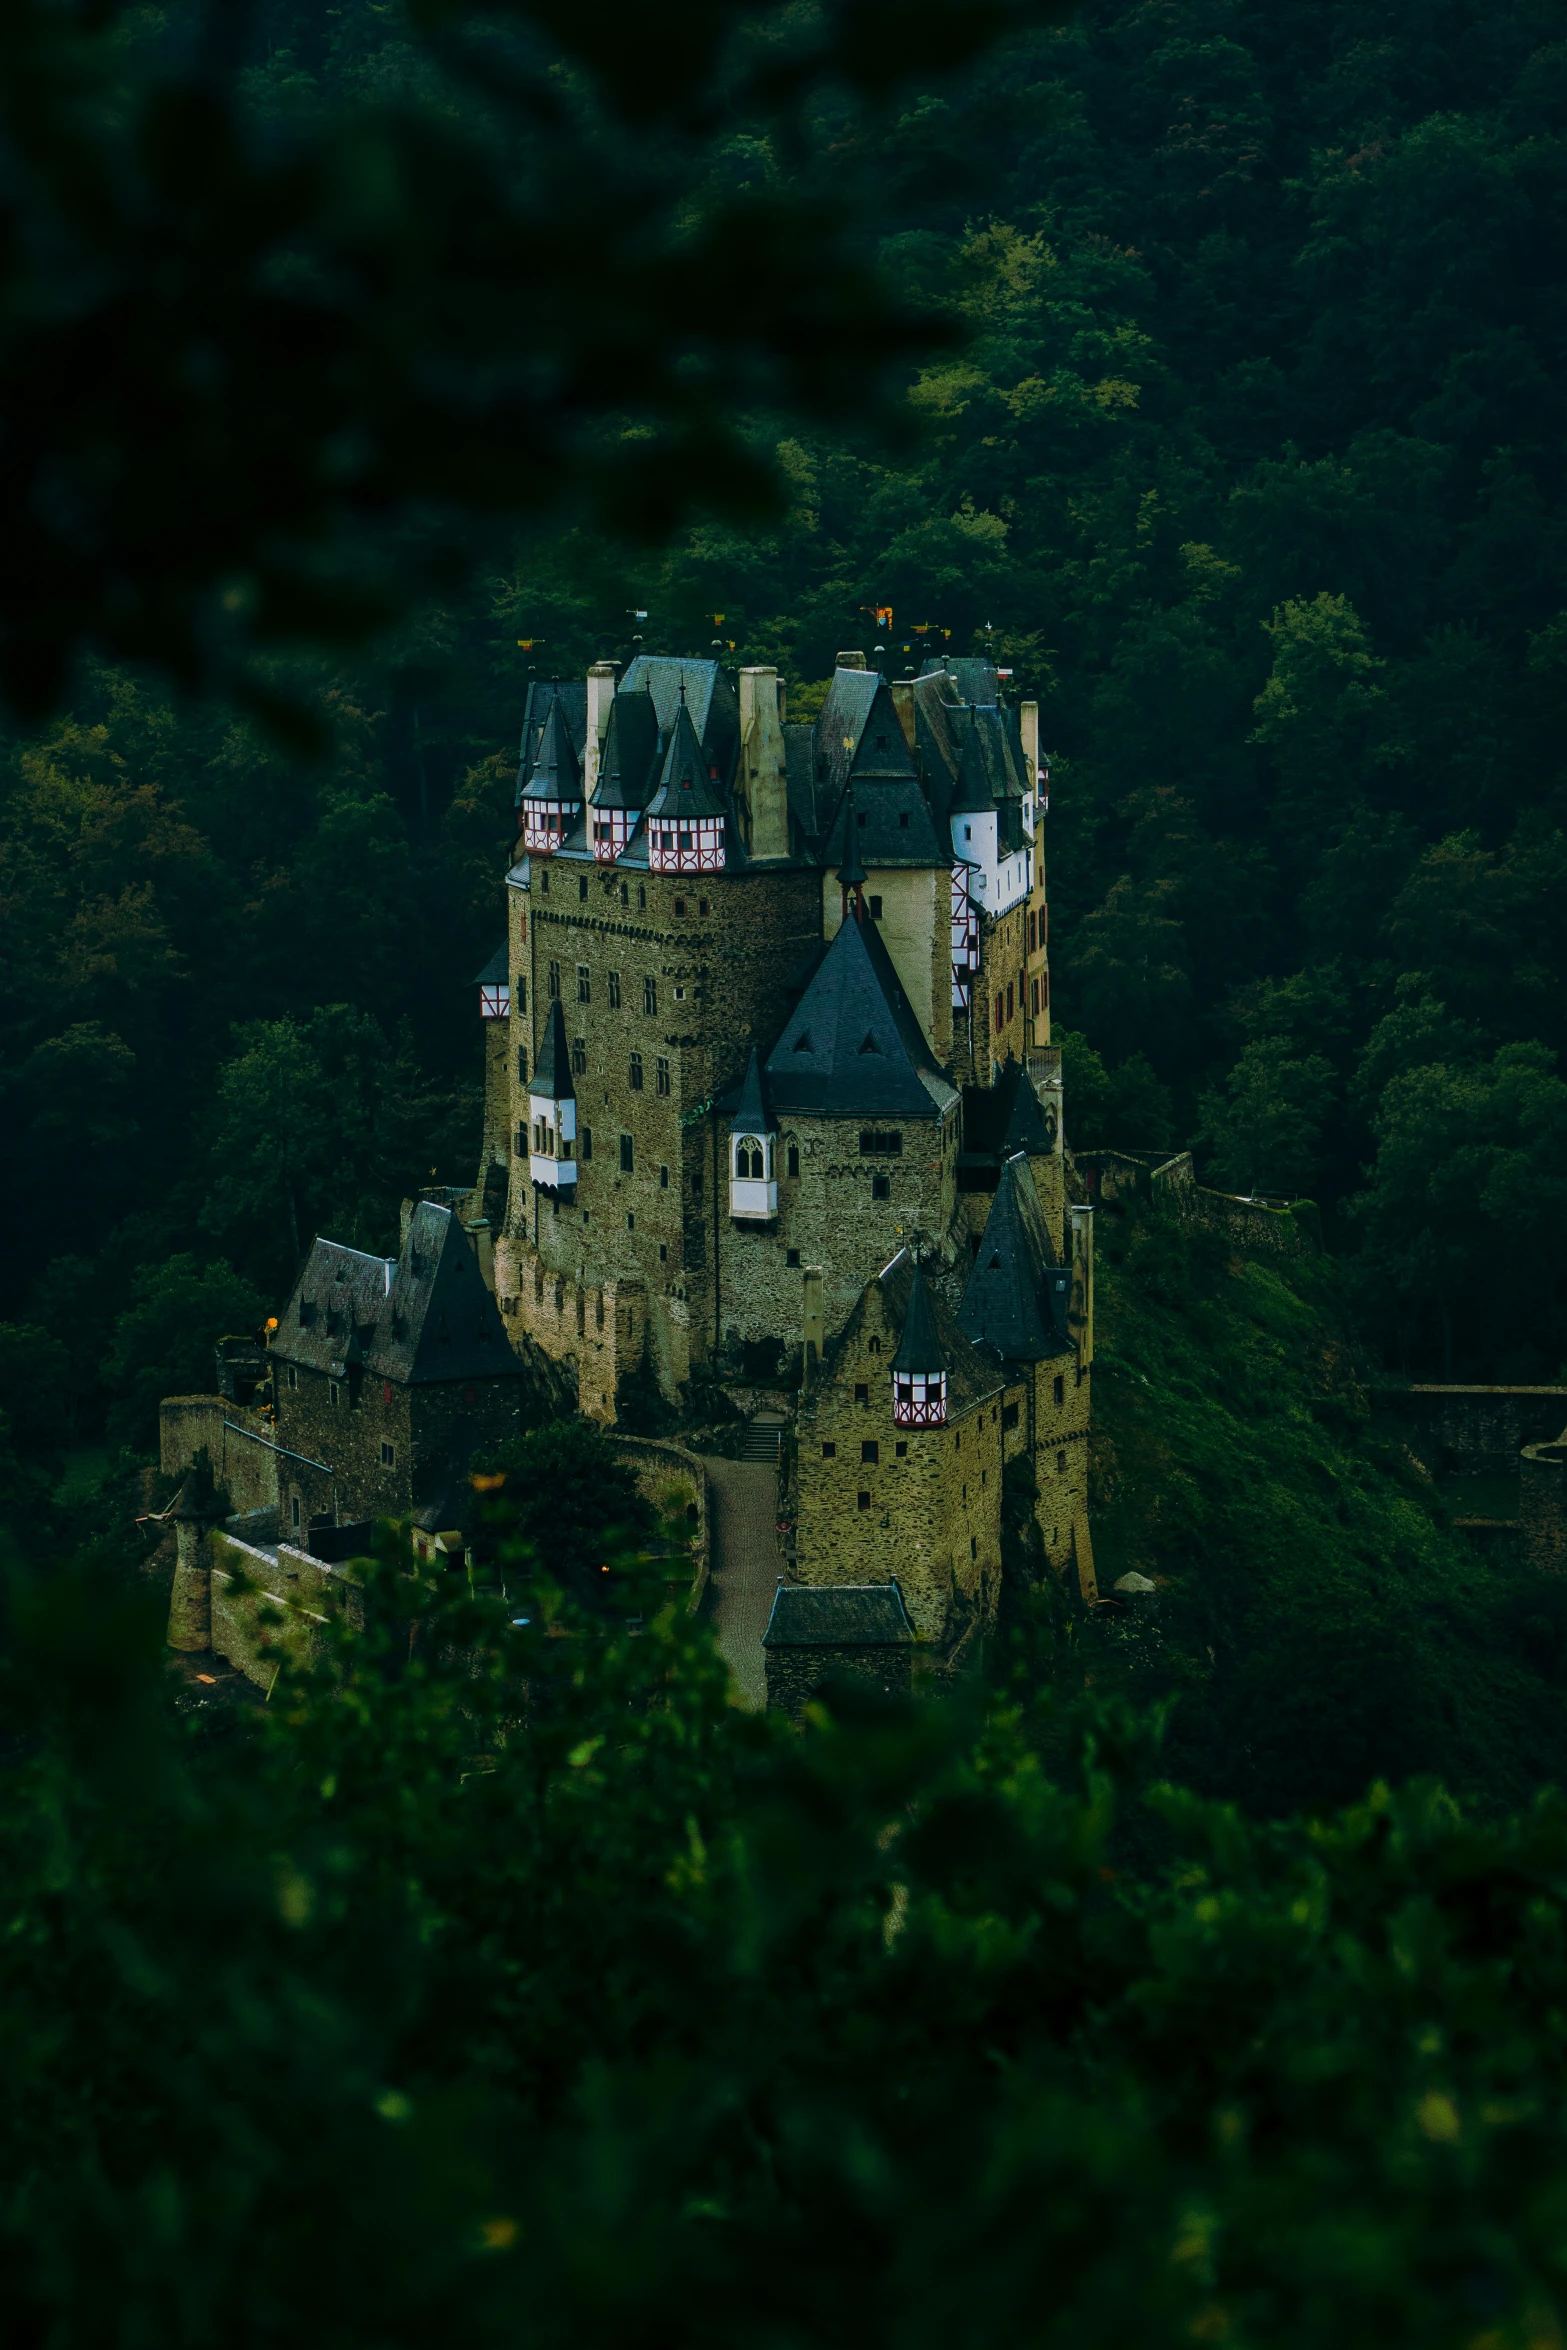 an old castle in the middle of a forest